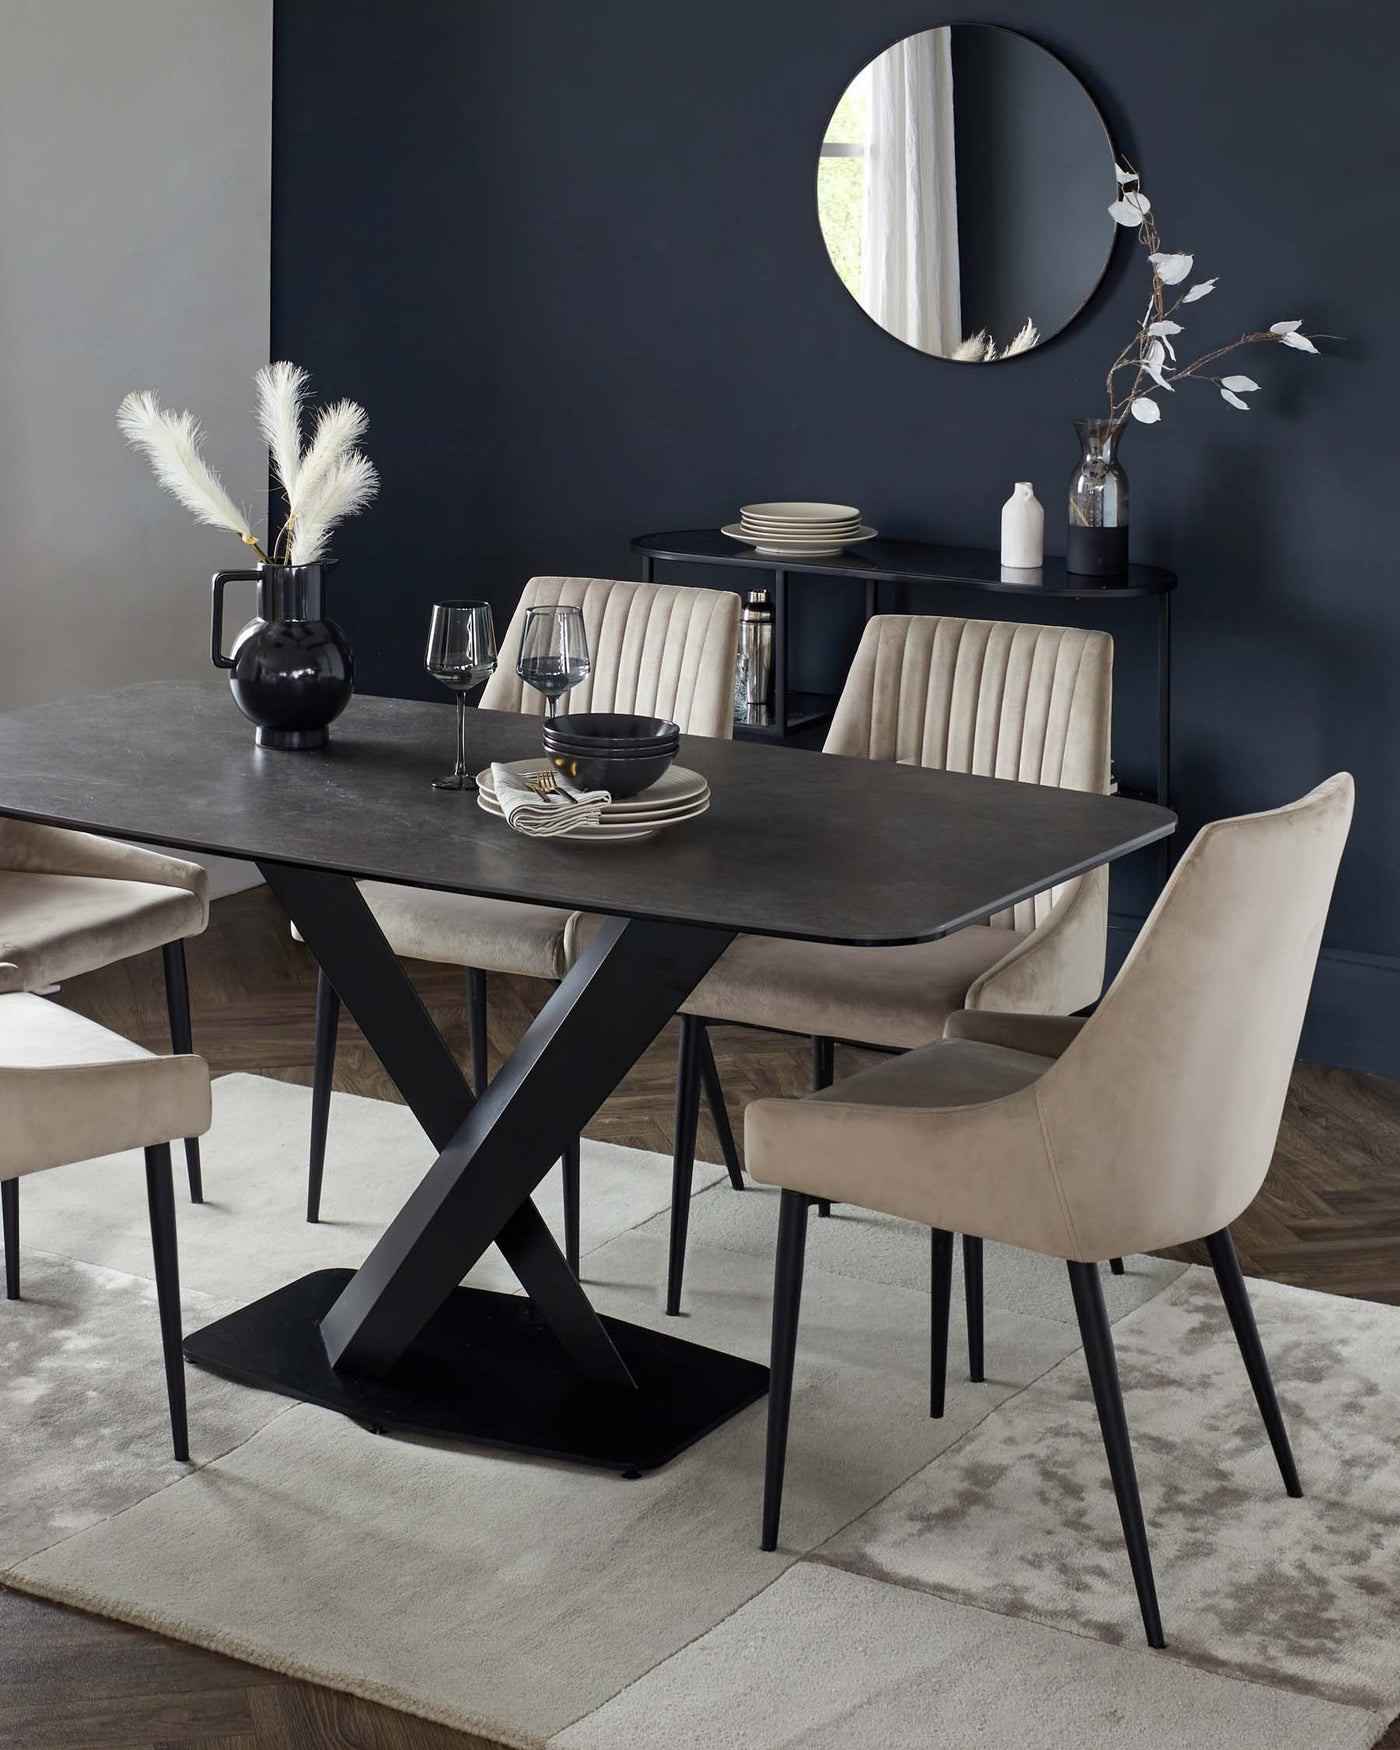 A contemporary dining room setup featuring a dark wood table with a unique X-shaped black metallic base, surrounded by four elegant taupe upholstered chairs with slender black legs. A minimal black console table with a circular mirror above it and decorative vases is visible in the background. The setting has a modern and sophisticated ambiance.